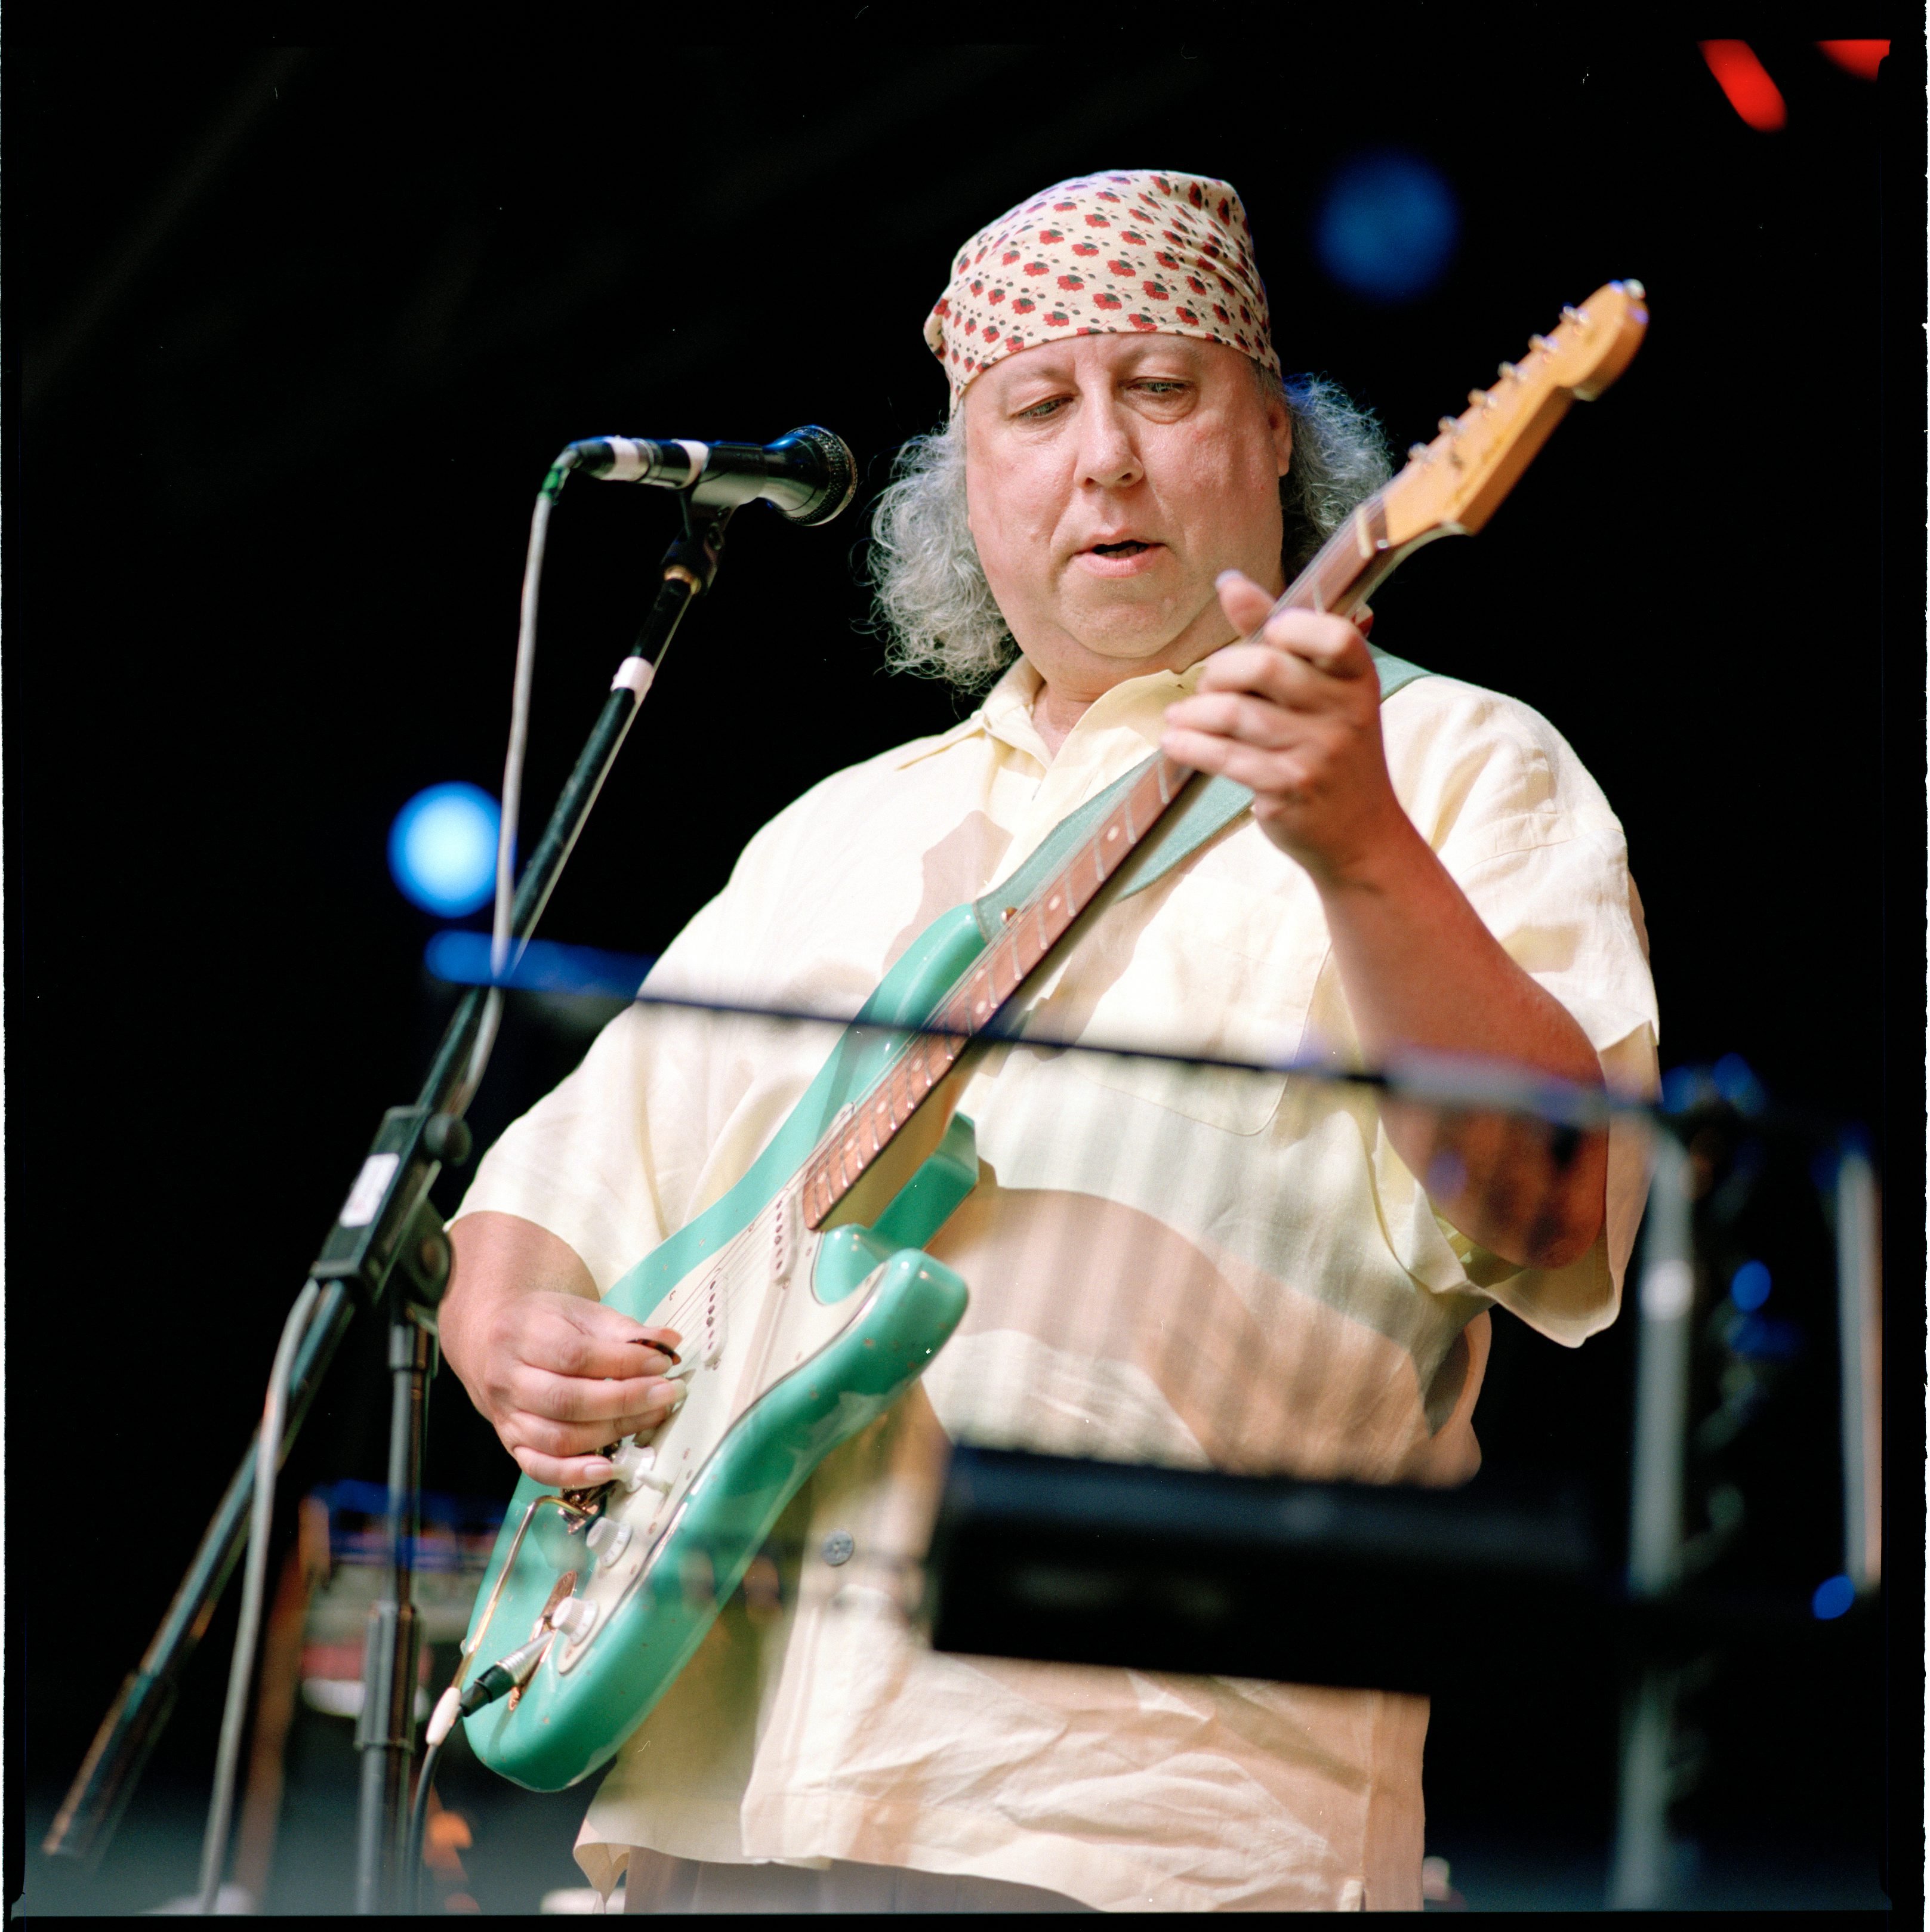 Peter Green performs on stage at Bishopstock Blues Festival, Devon, United Kingdom, August 2001. | Photo by Michael Putland/Getty Images